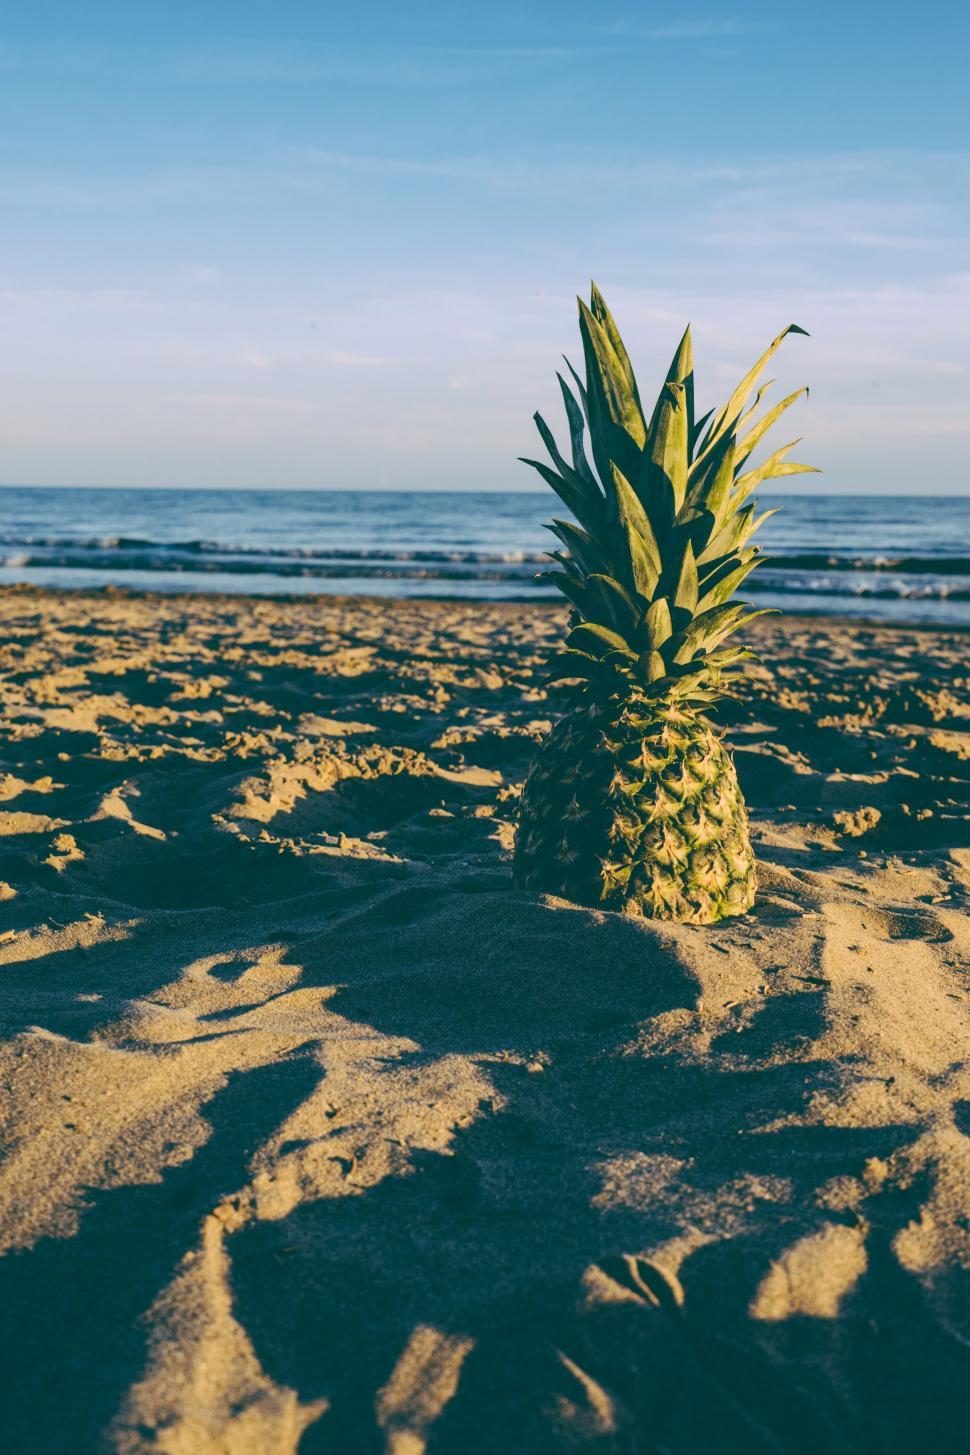 Free Image of Beach Sand and Pineapple  